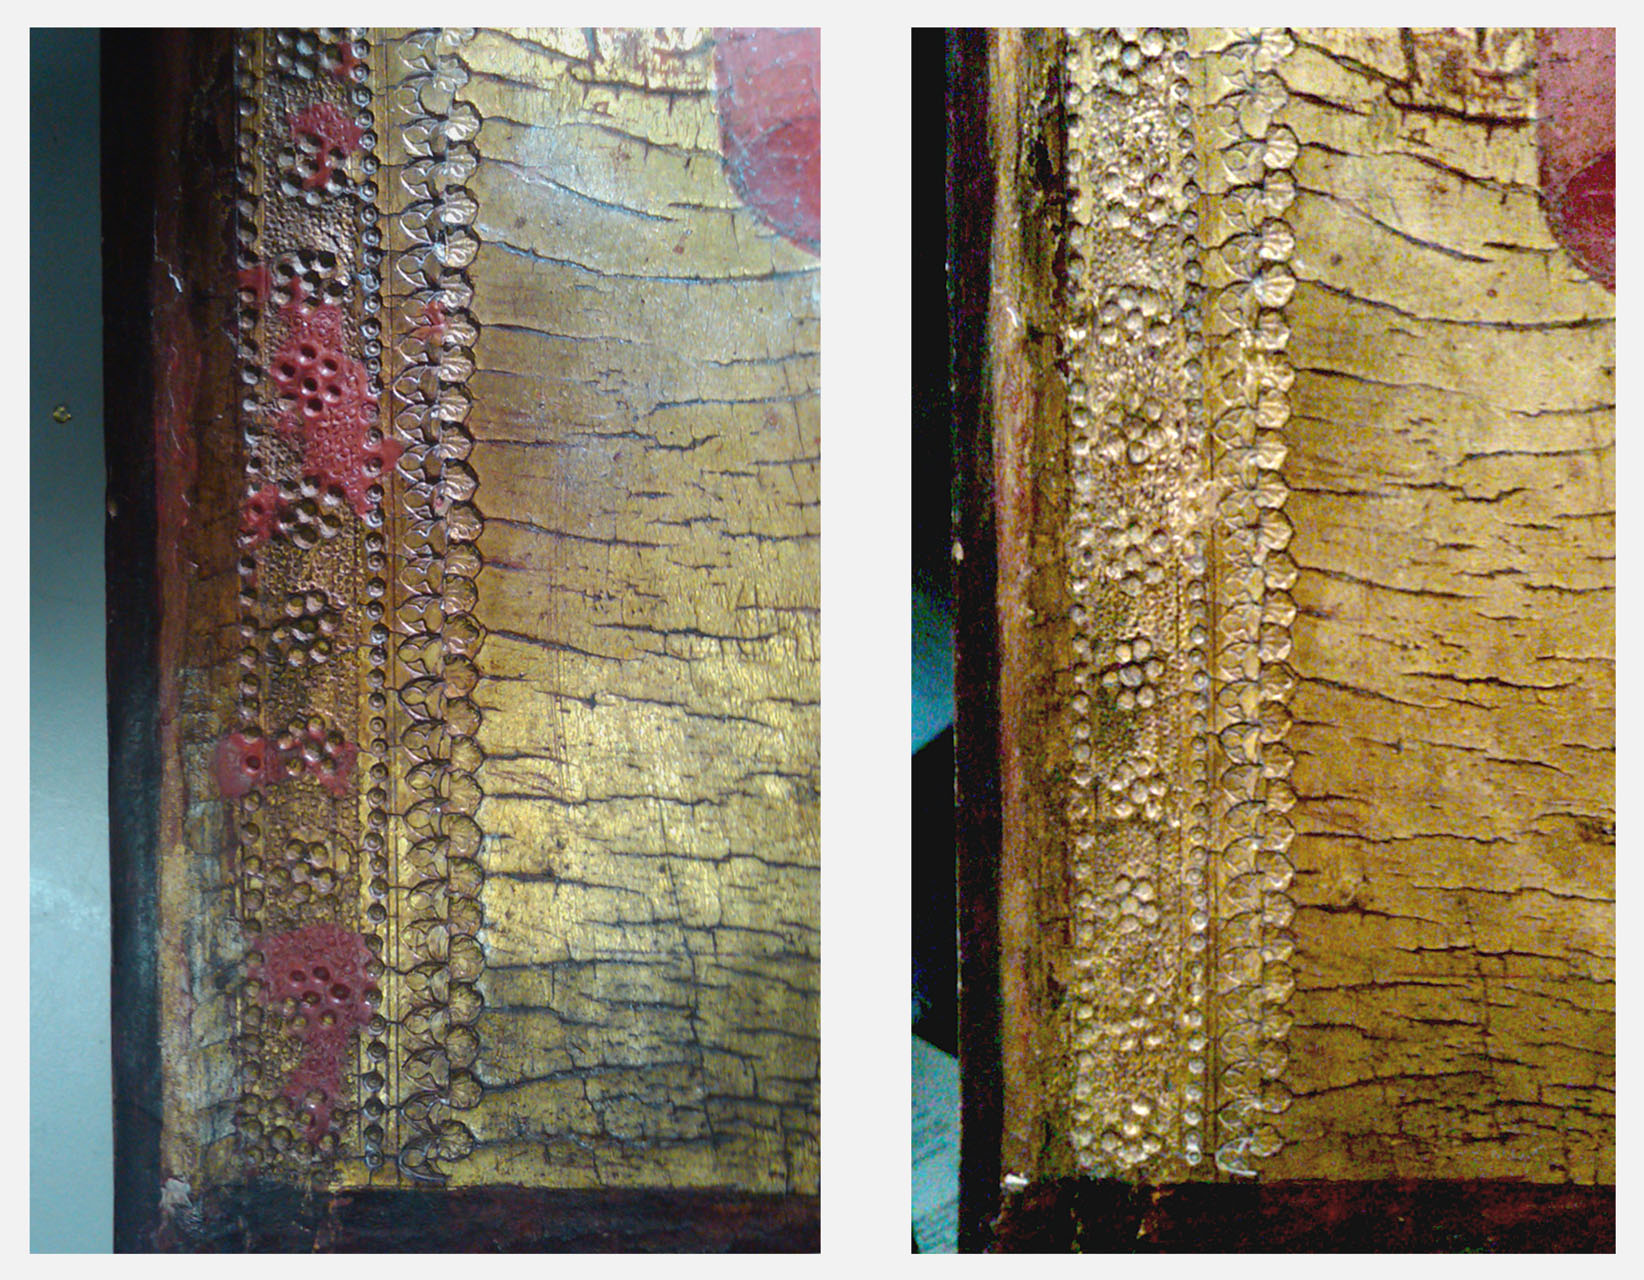 Left: Left edge after creating red wax fills. Right: Left edge after gilding new fills.